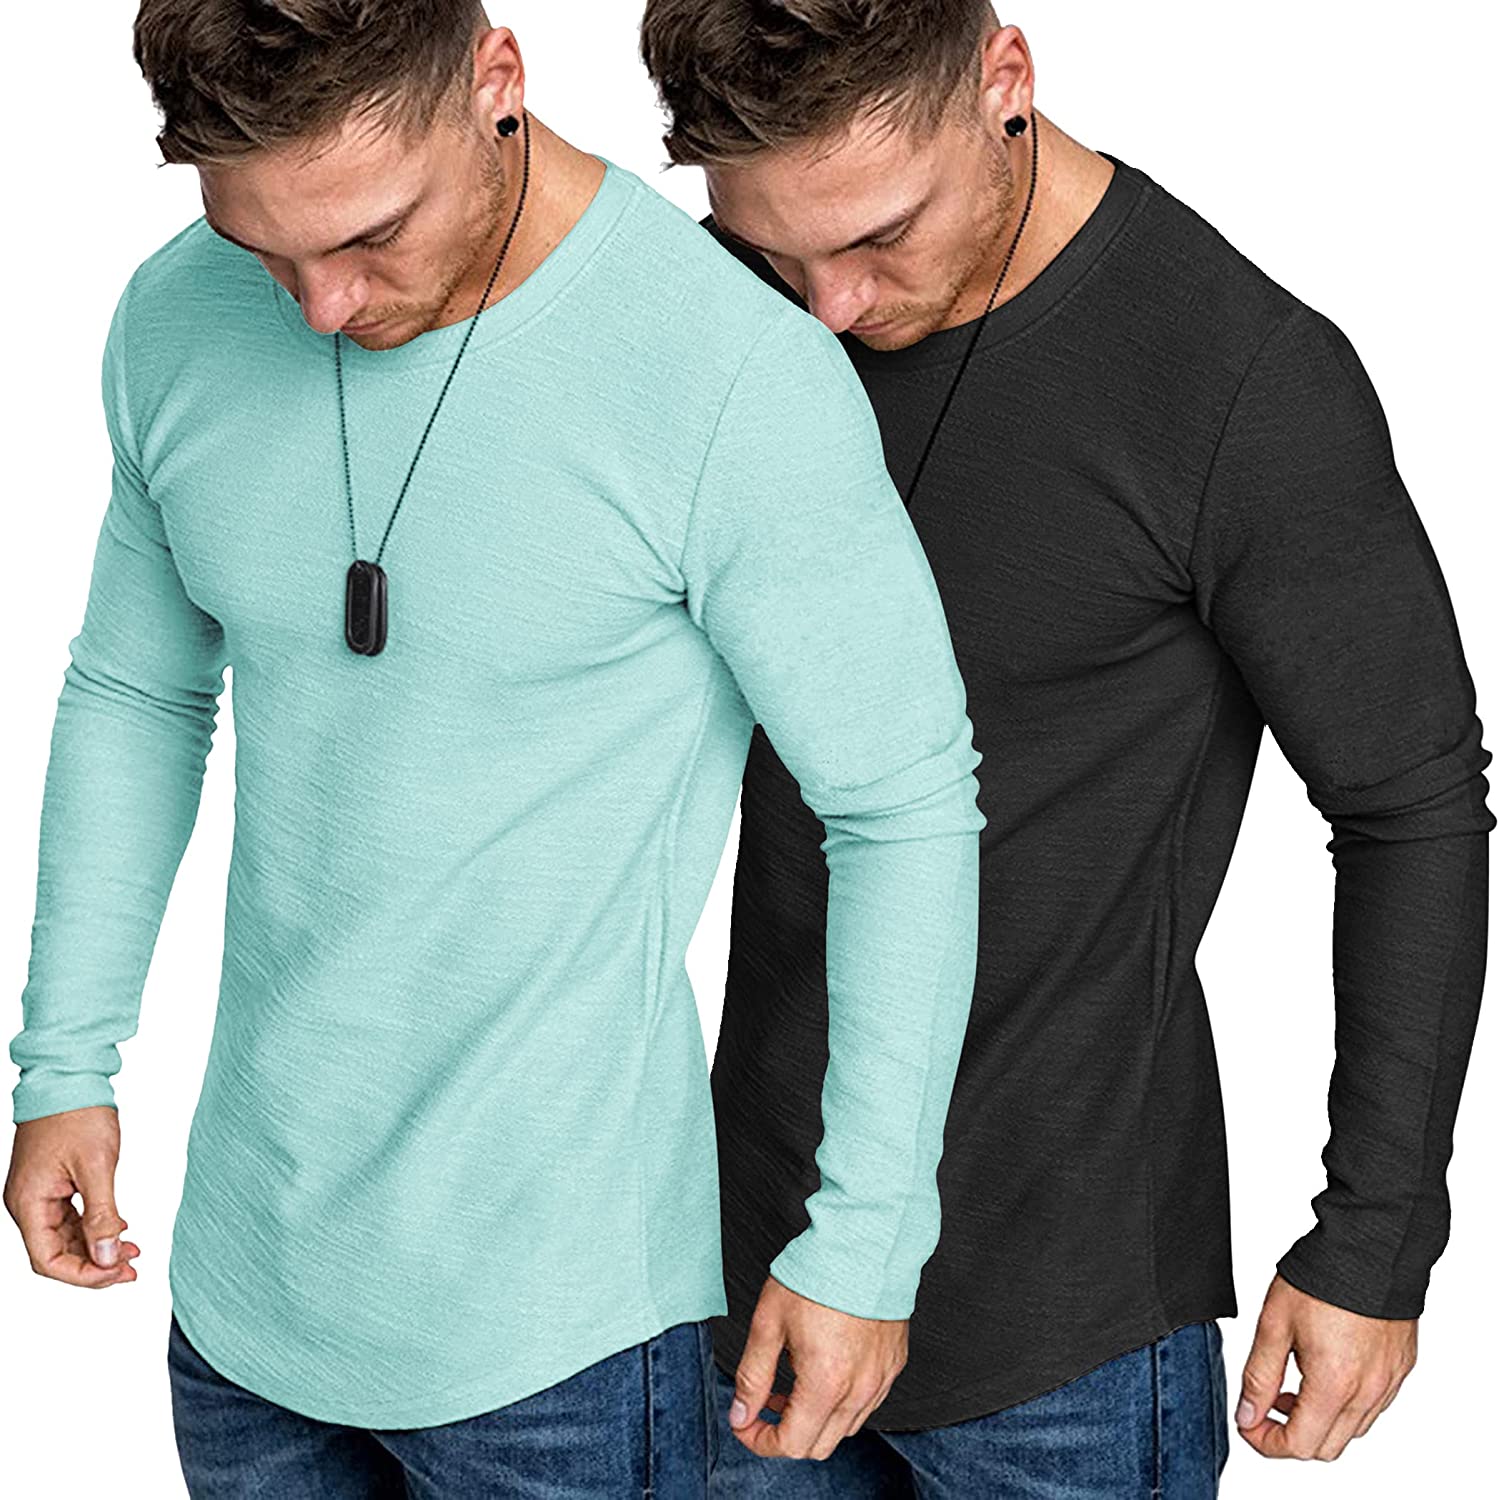 COOFANDY Men 2 Pack Muscle Fitted T Shirt Gym Workout Athletic Long Sleeves Tee 